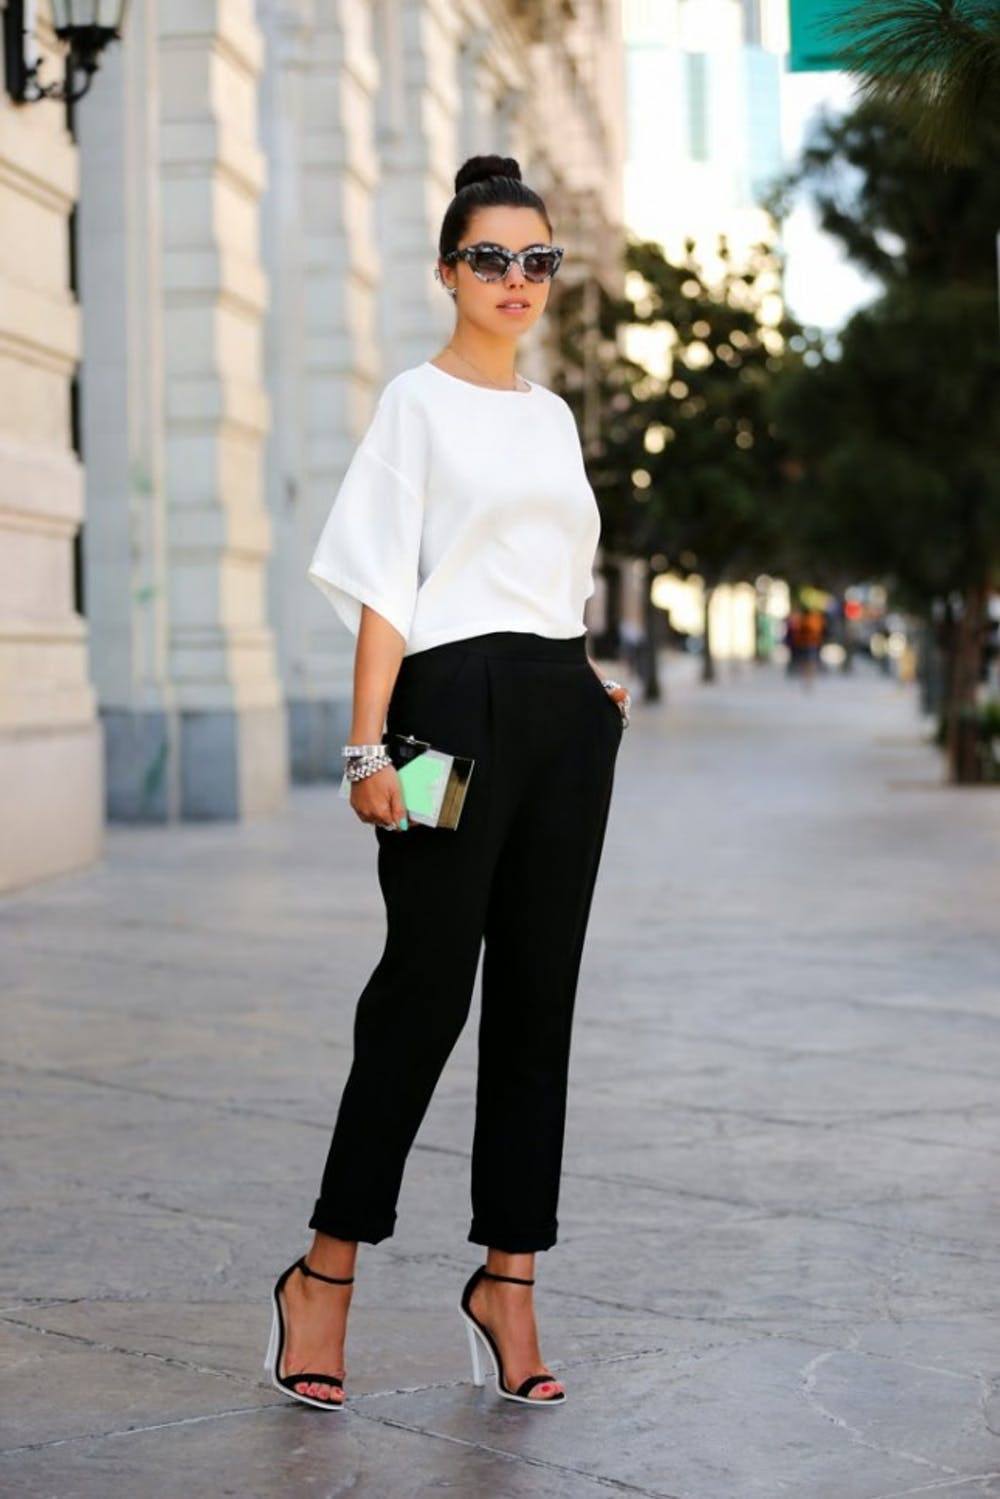 Modest Crop Top Outfits - 16 Ways To Wear Crop Tops Modestly